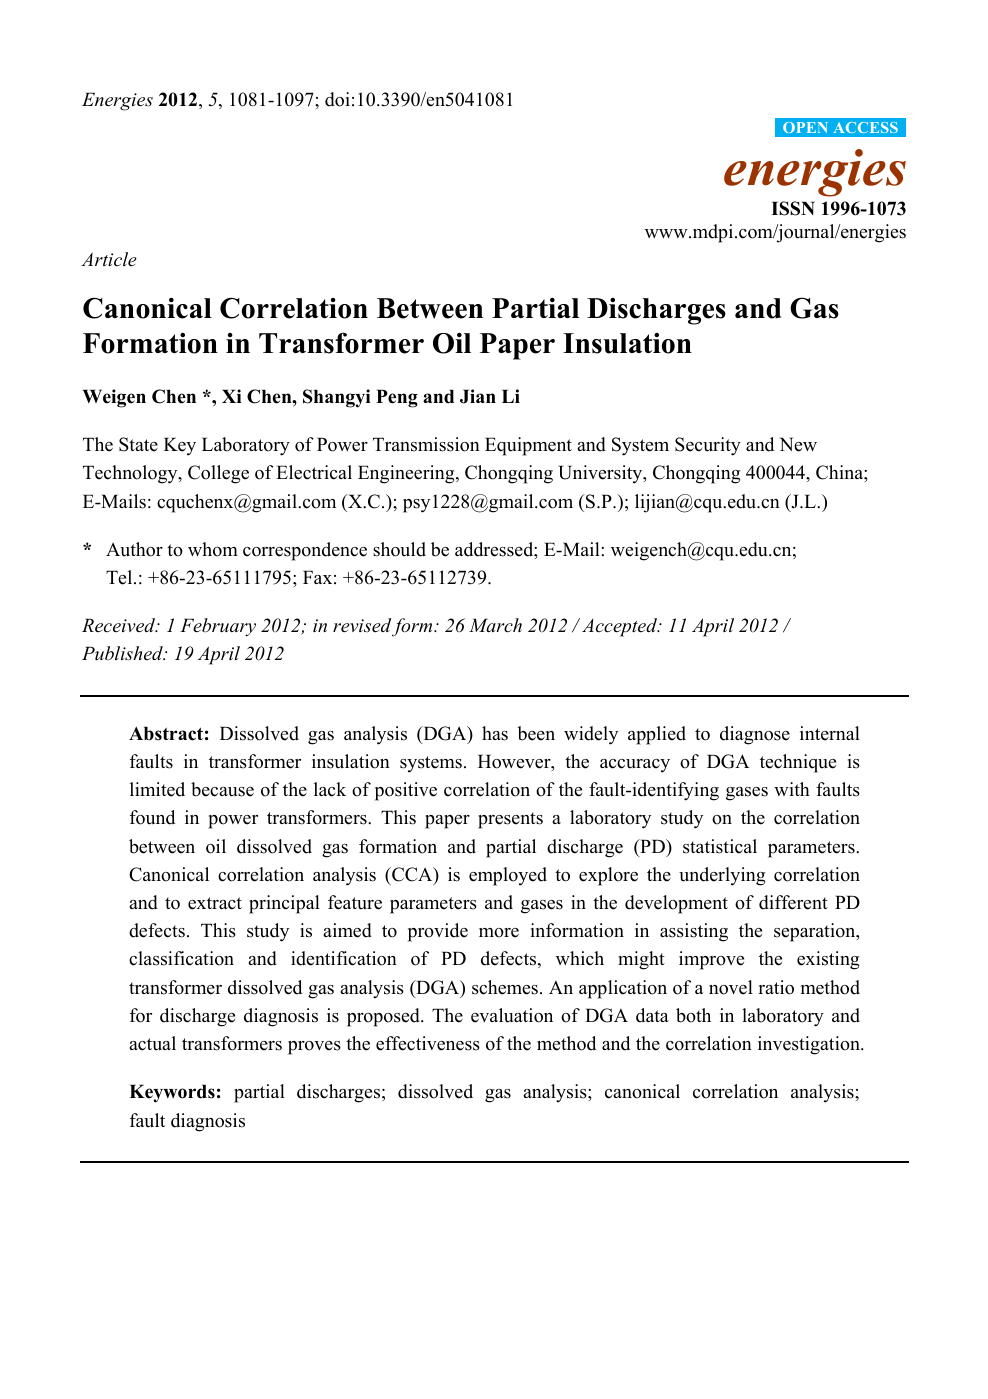 Canonical Correlation Between Partial Discharges And Gas Formation In Transformer Oil Paper Insulation Topic Of Research Paper In Earth And Related Environmental Sciences Download Scholarly Article Pdf And Read For Free